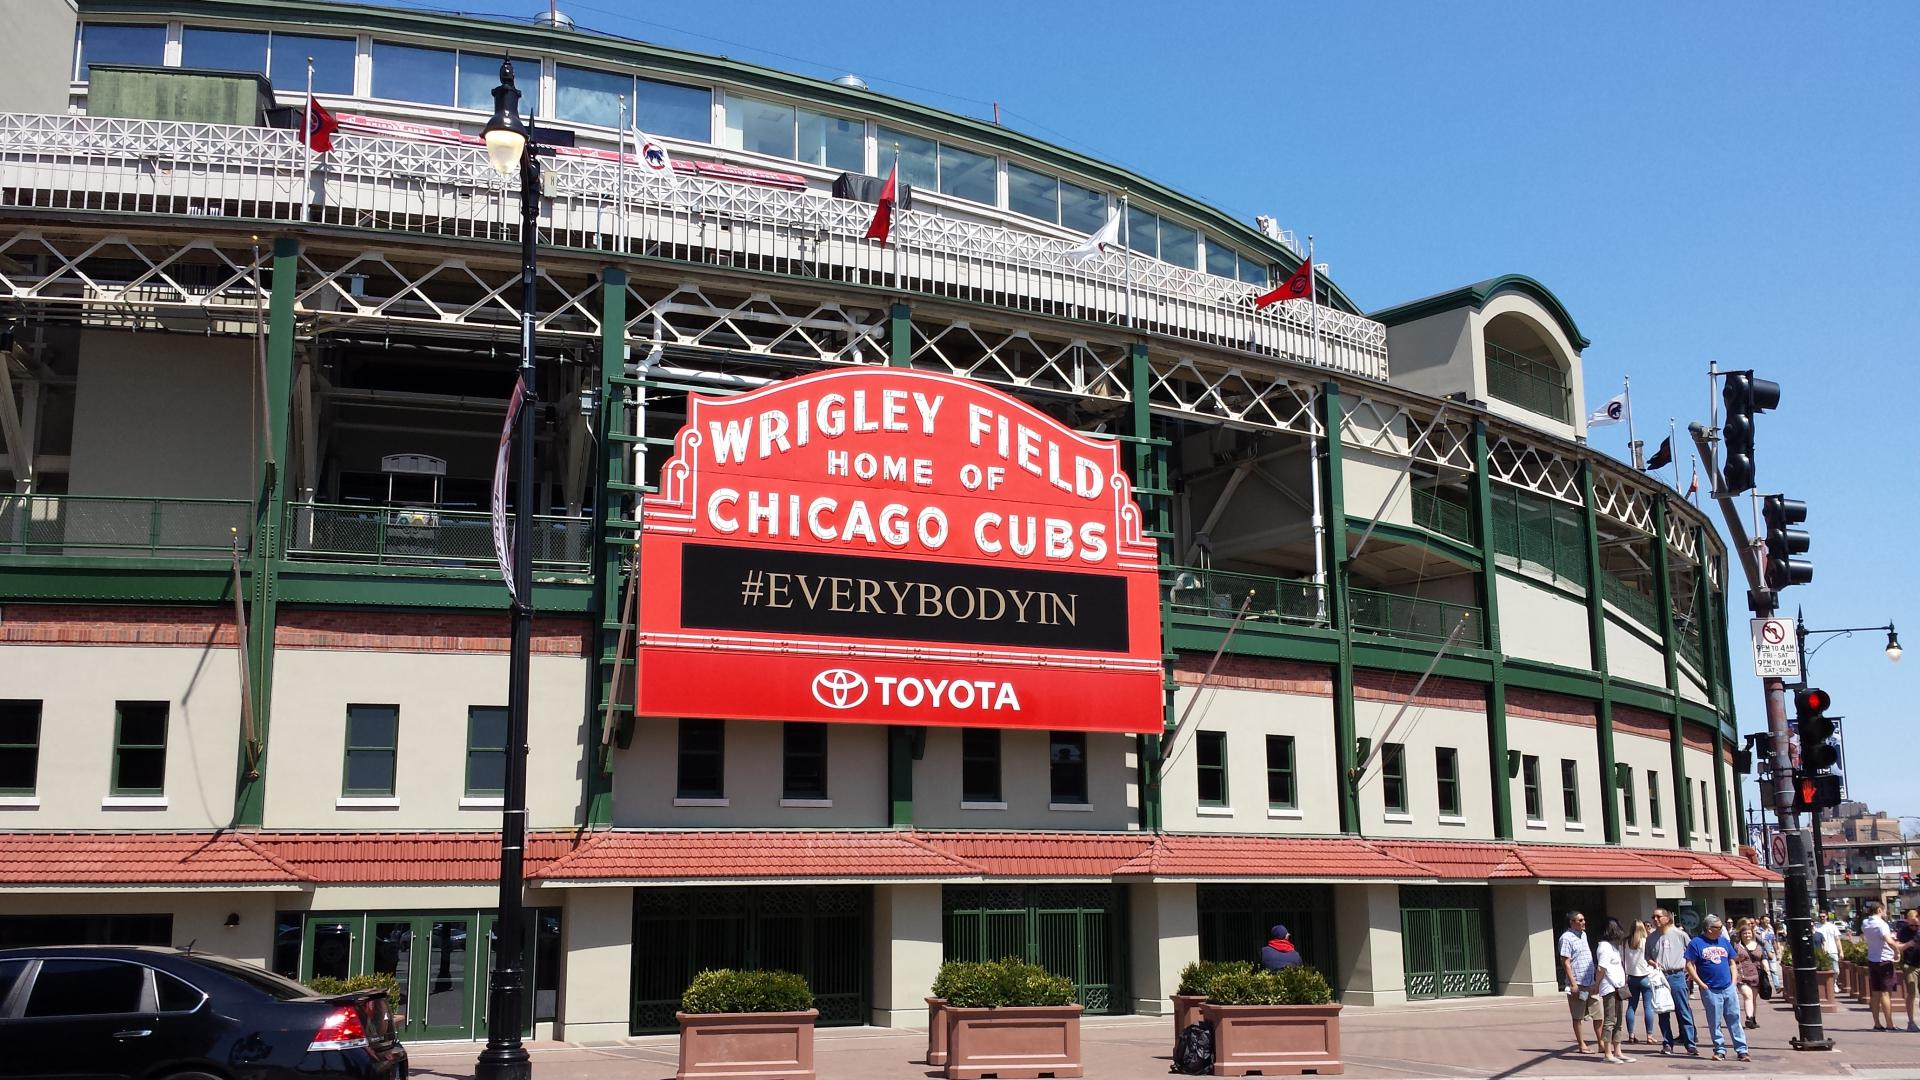 1920x1080 Chicago Cubs Professional Baseball Opening Day | Calendar of Events | eVisitorGuide Chicag